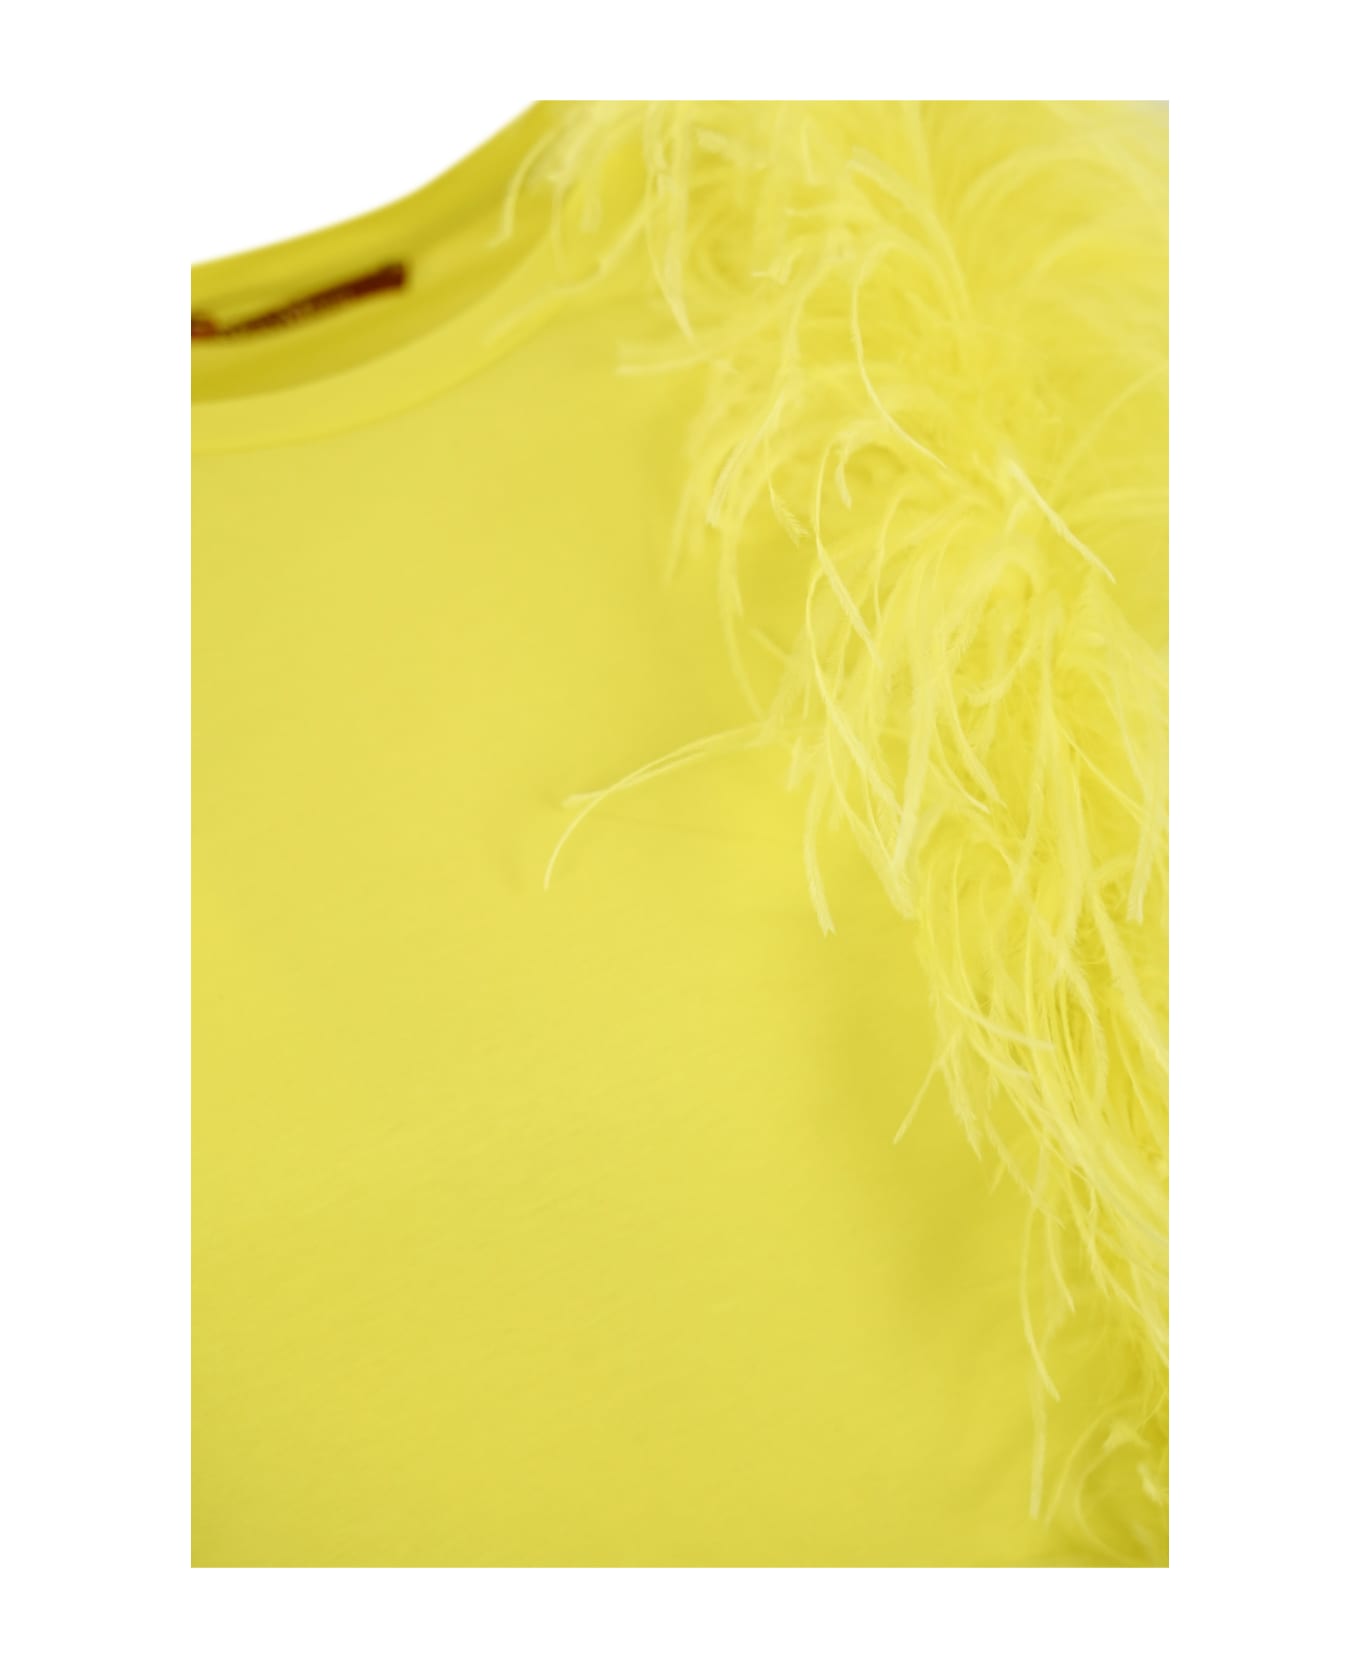 Max Mara Studio Cotton T-shirt With Feathers - Limone Tシャツ